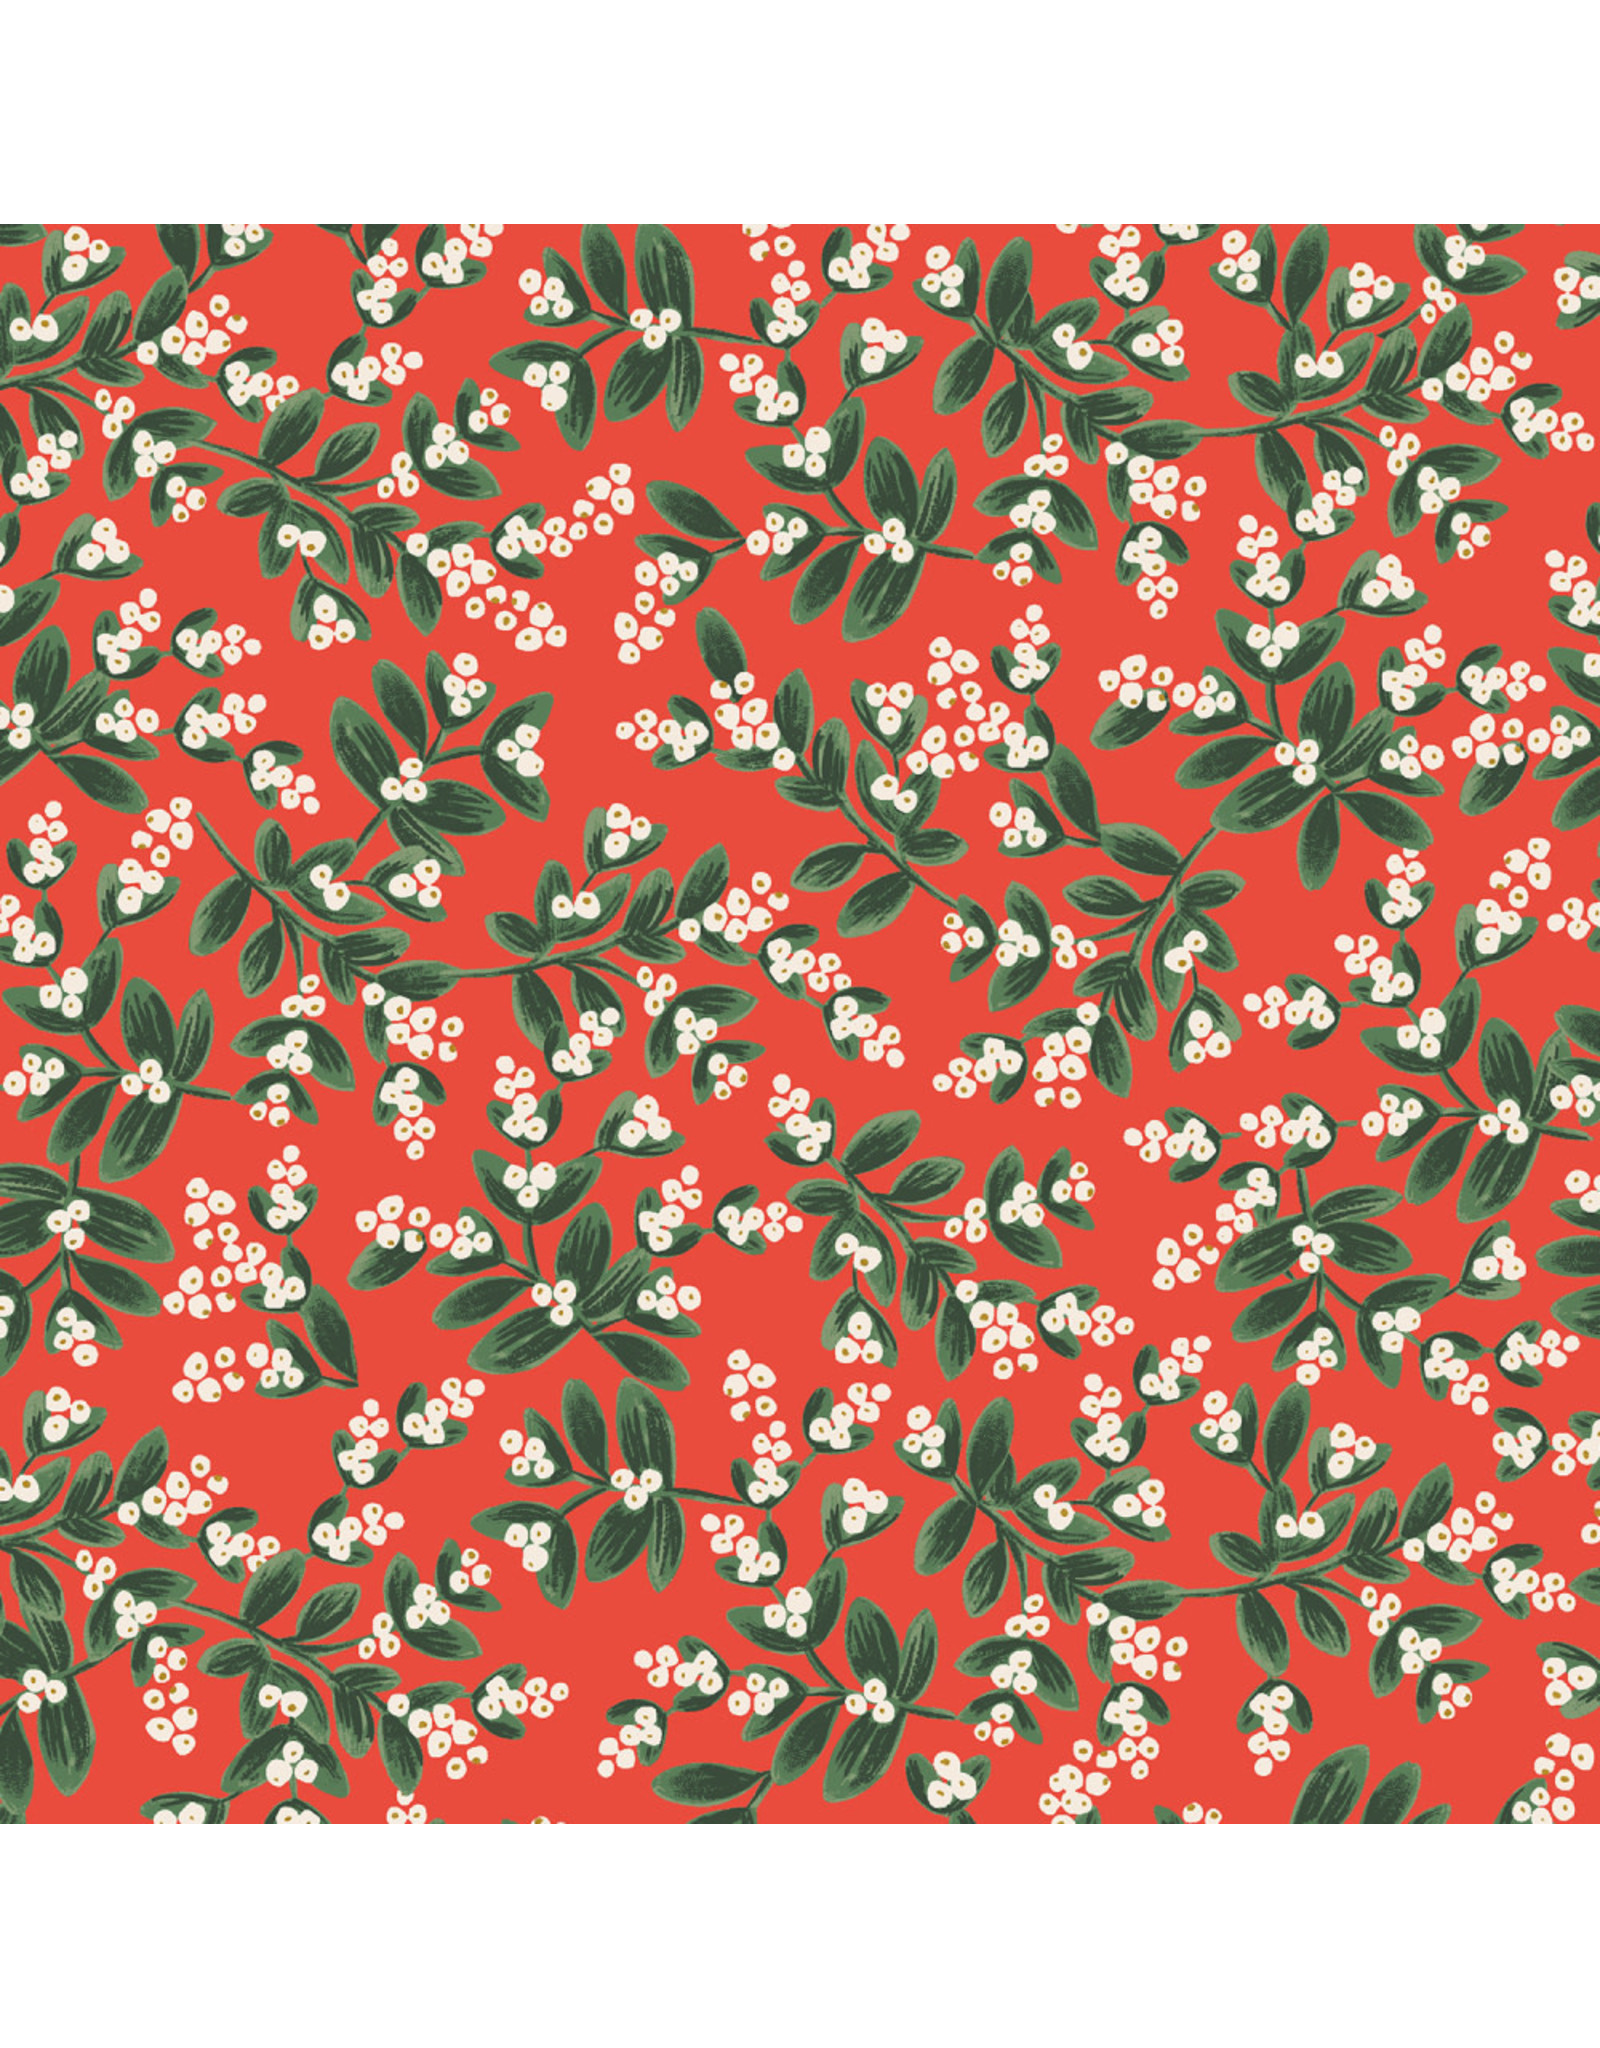 Rifle Paper Co. Holiday Classics, Mistletoe in Red with Metallic, Fabric Half-Yards